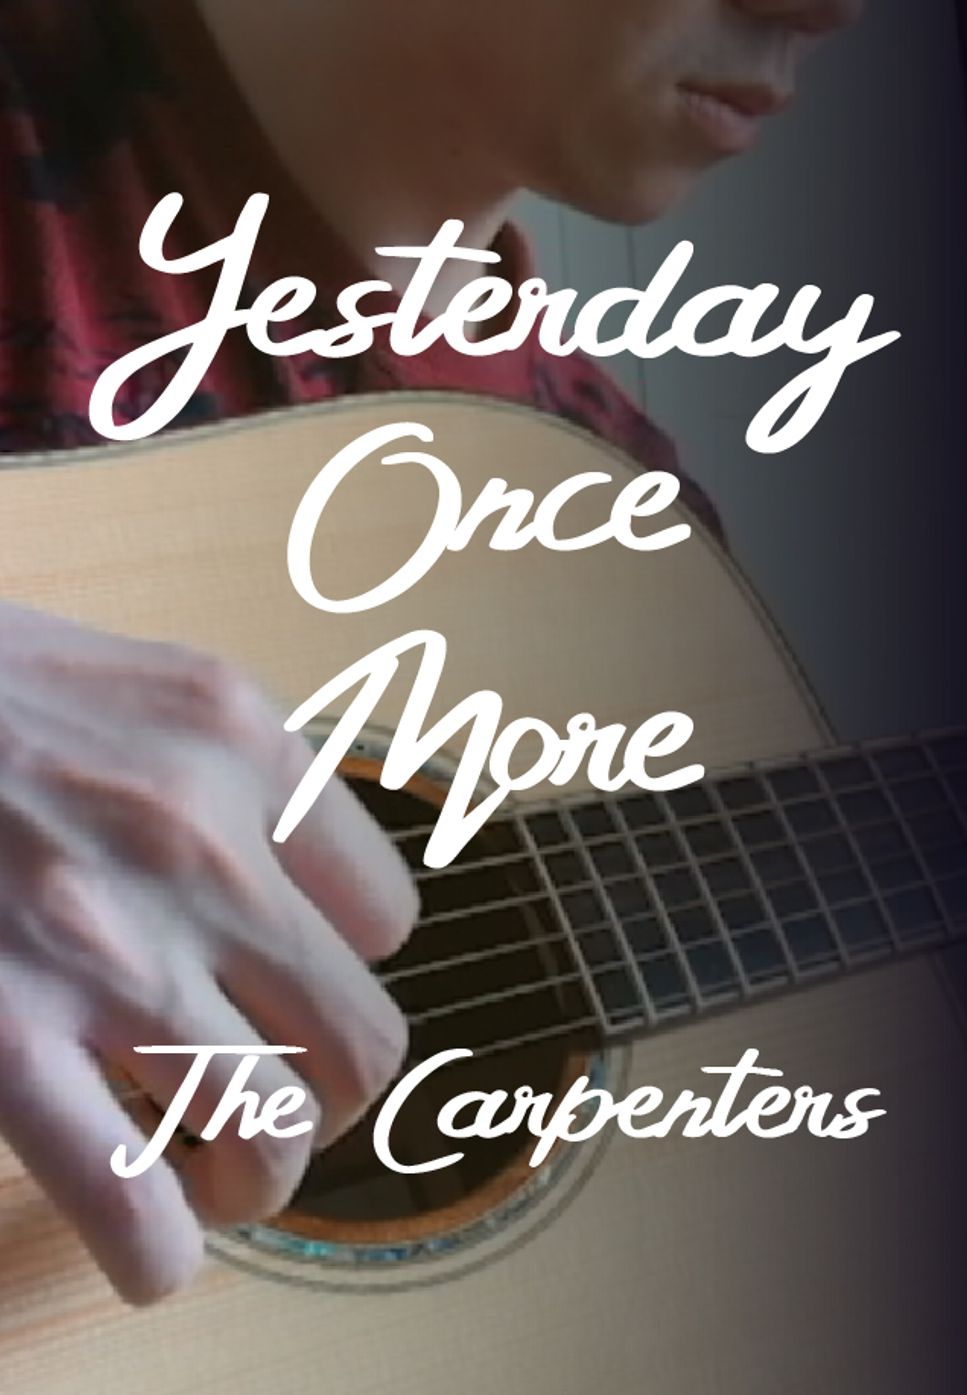 The Carpenters - Yesterday Once More (Fingerstyle) by HowMing